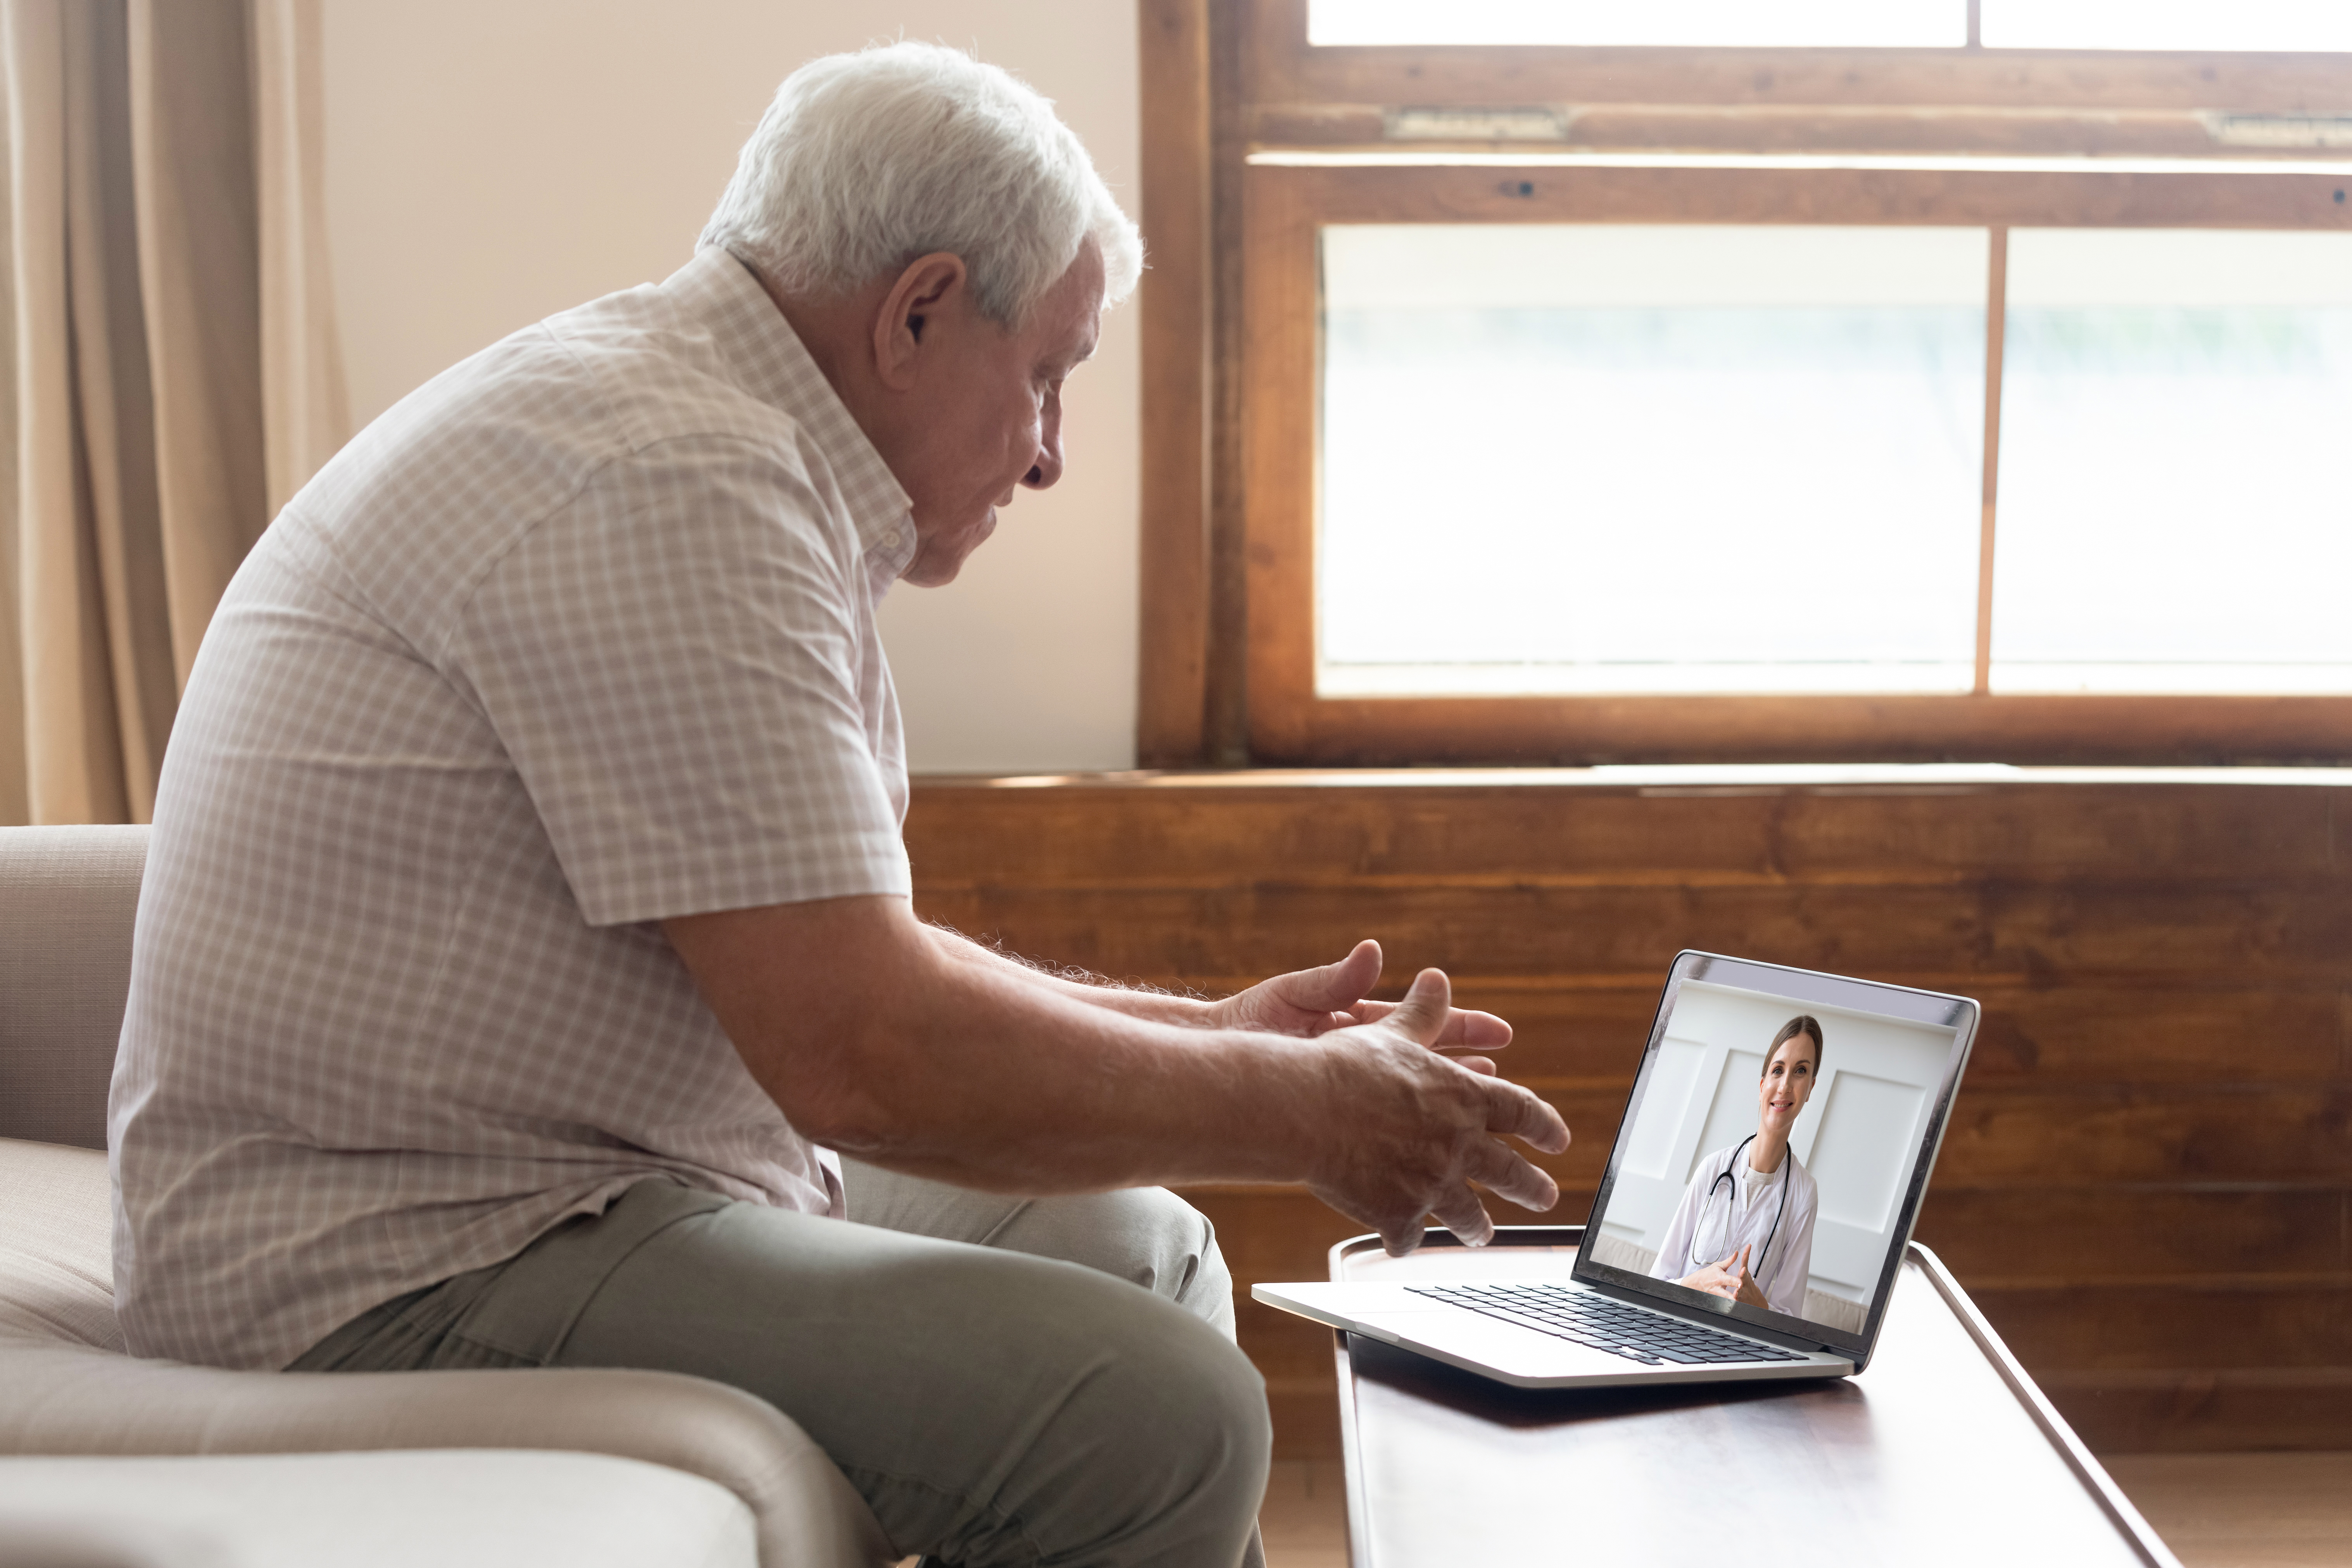 San Francisco Audiology - Keeping You Connected - Expanded Telehealth Services Available